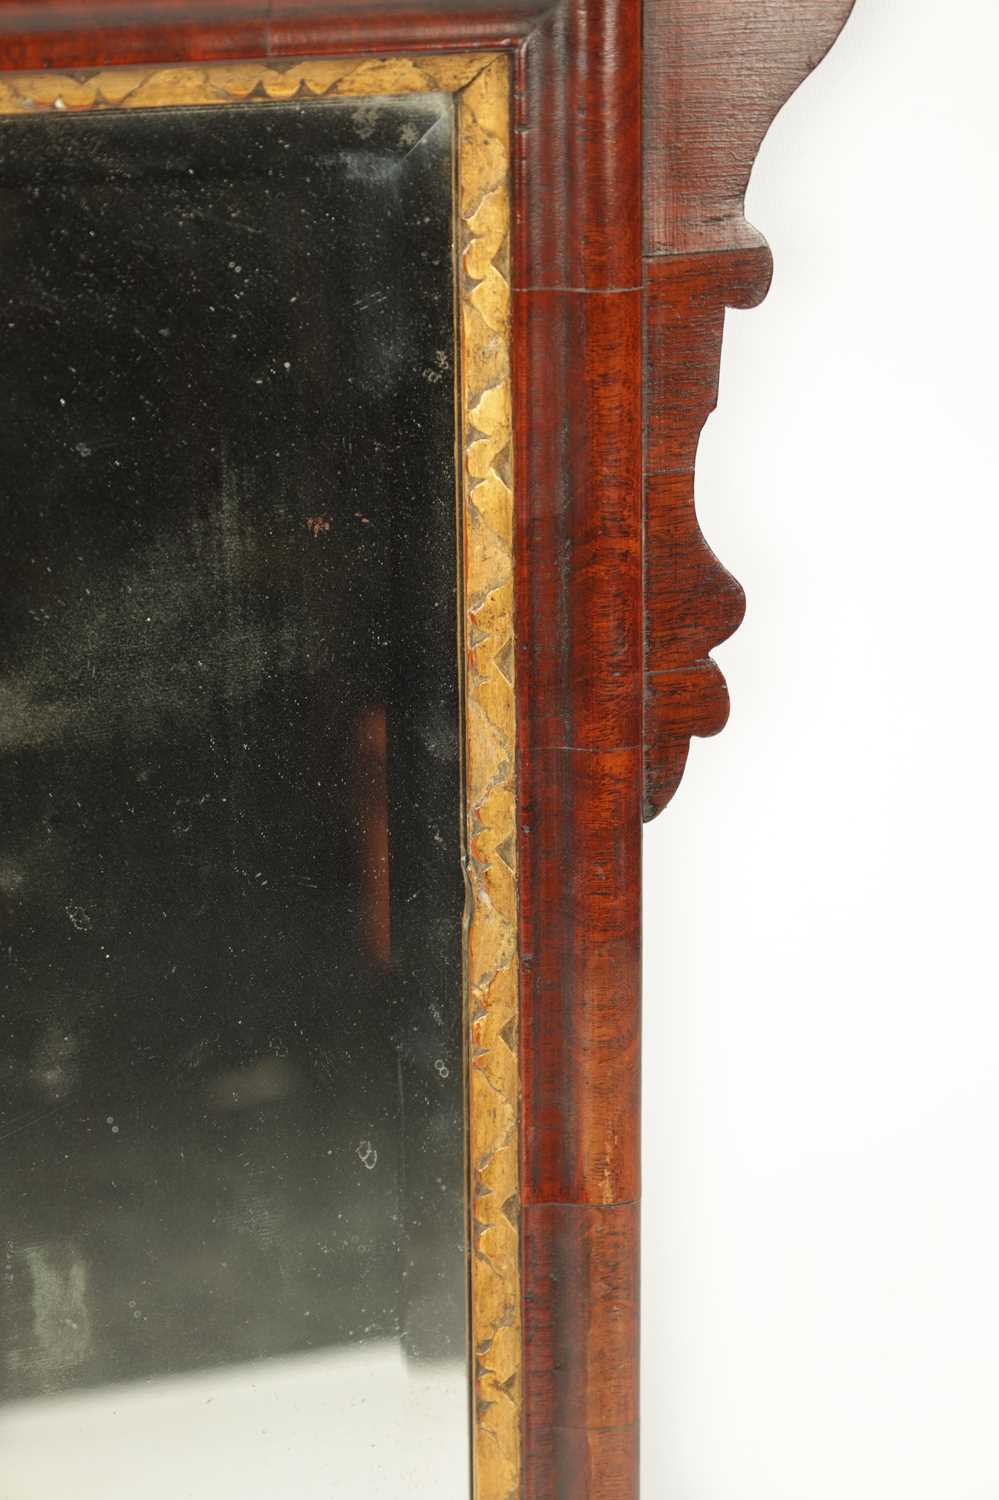 A SMALL 18TH CENTURY WALNUT HANGING MIRROR - Image 4 of 6